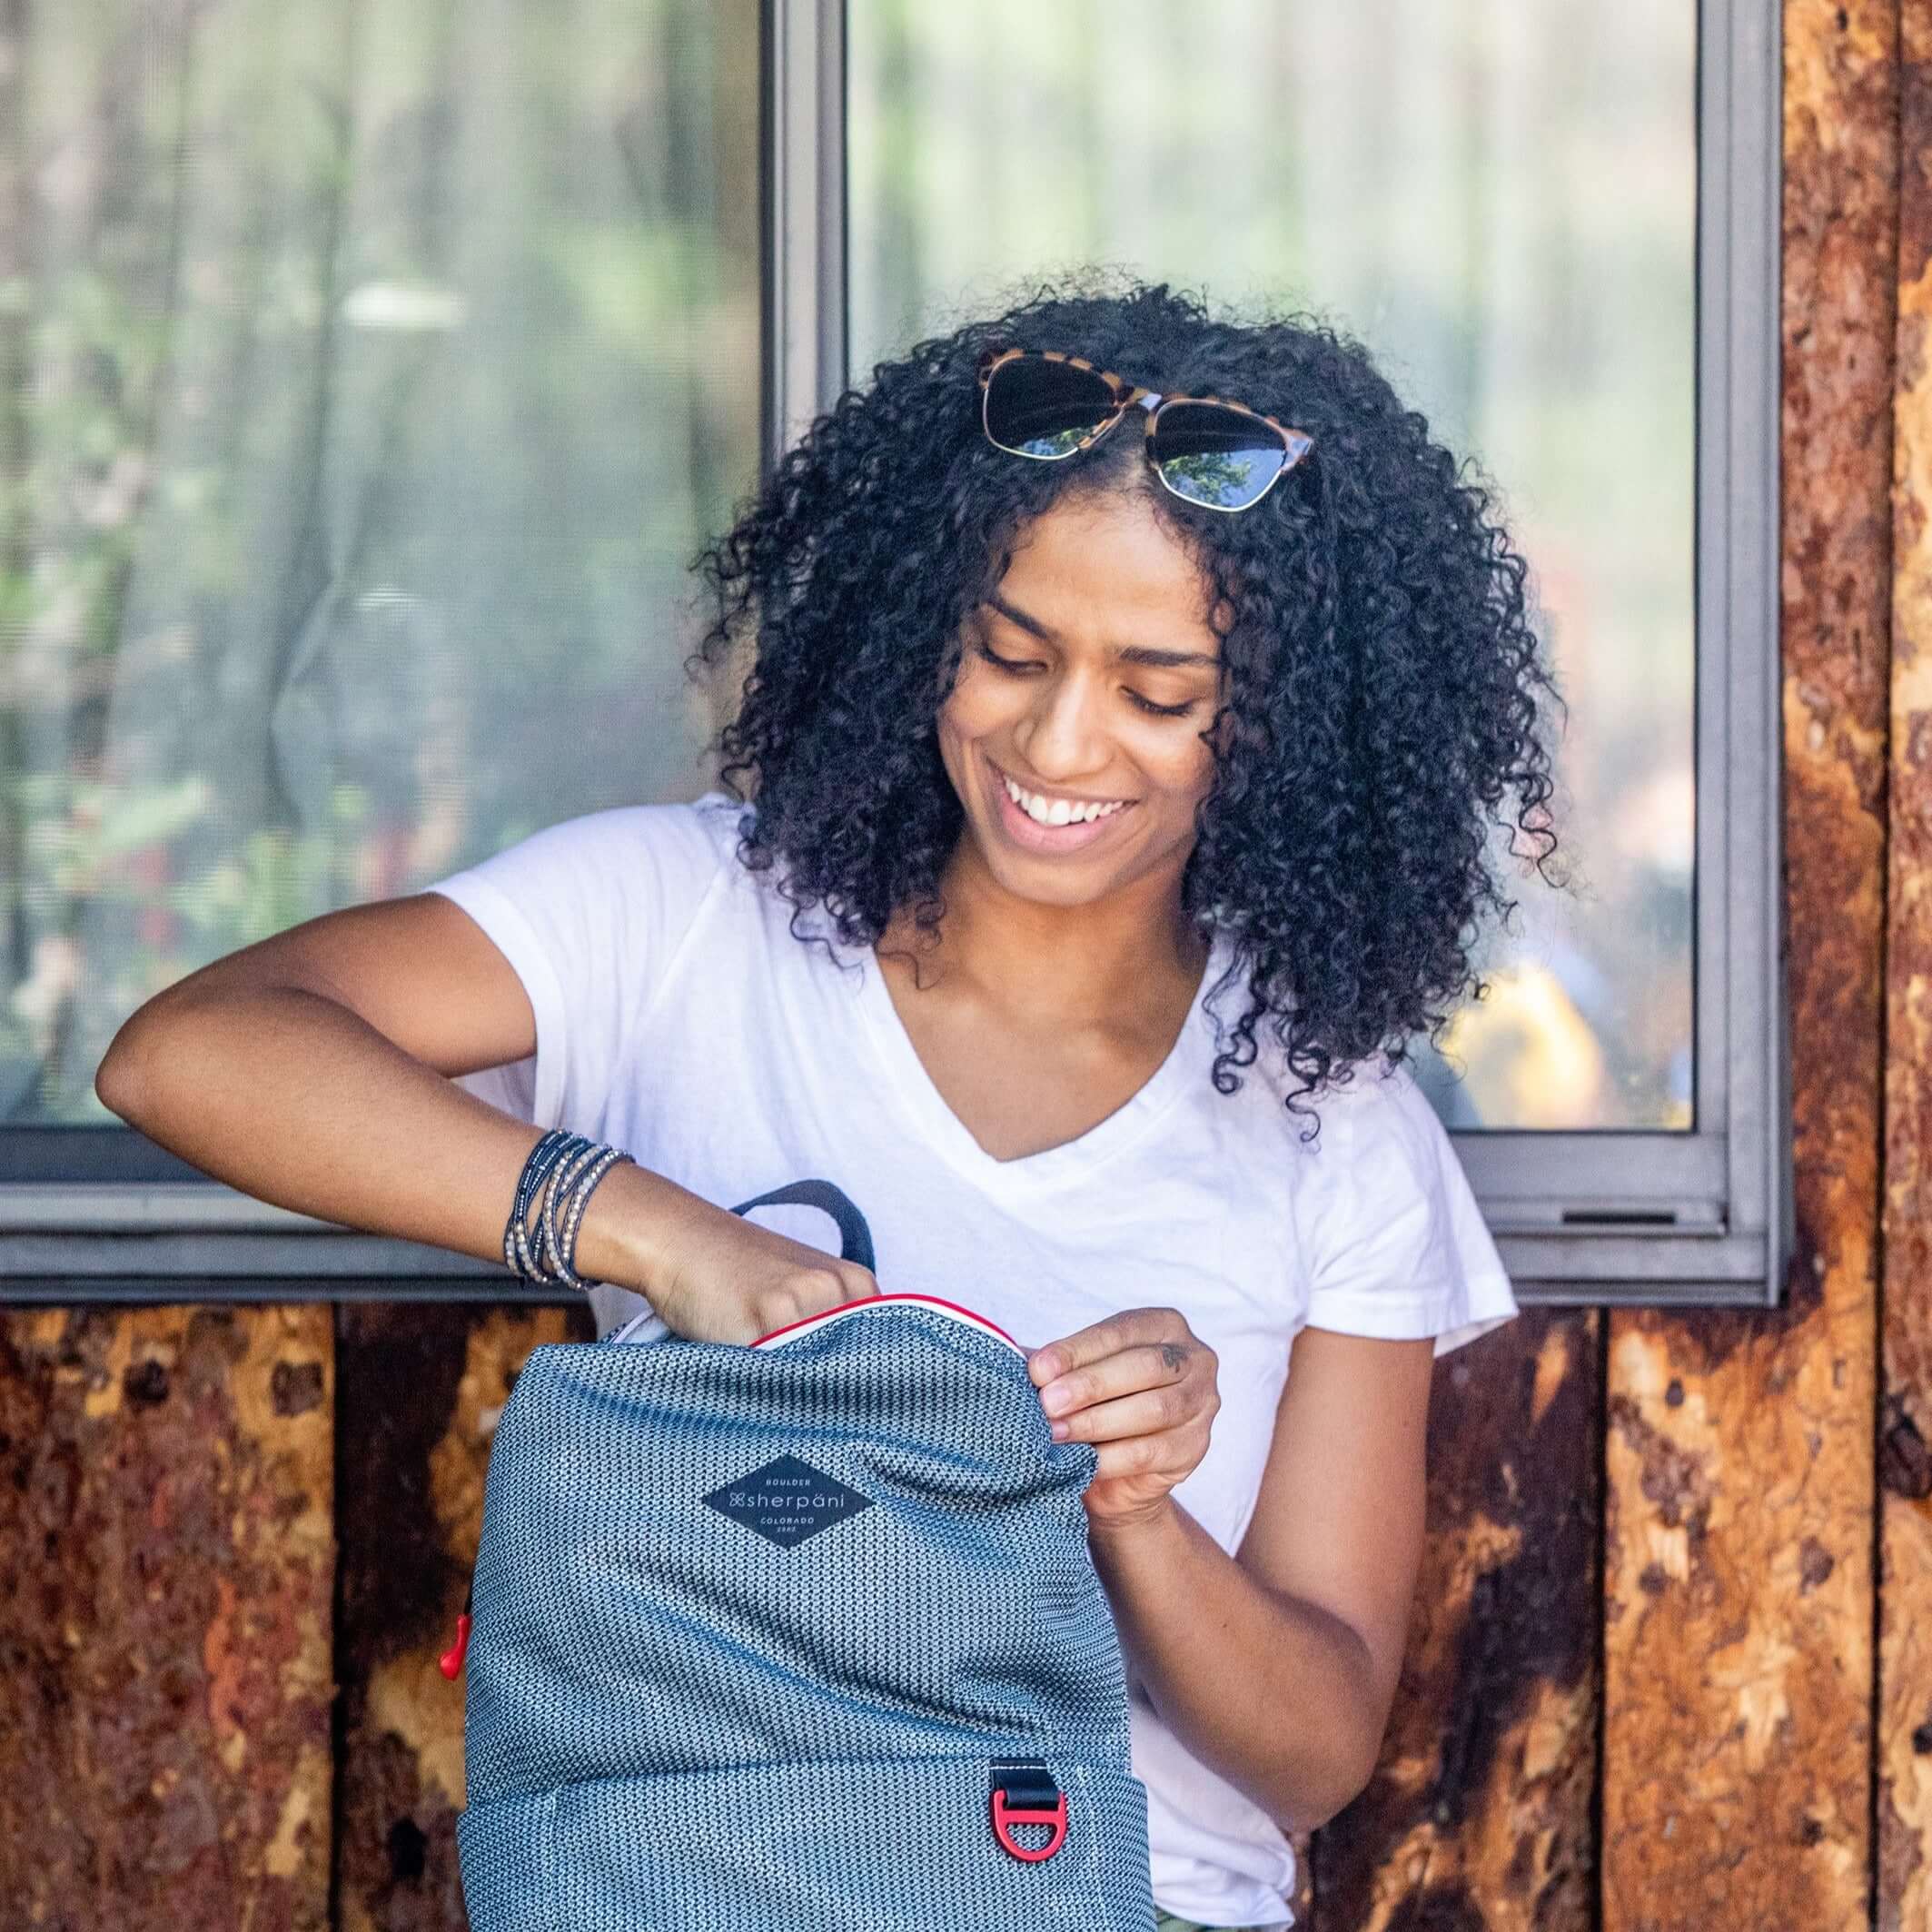 A curly haired woman sits in front of a wooden wall outside. She is wearing a white tee shirt and smiling downward. She is unzipping the main compartment of Sherpani mesh backpack, the Adaline.